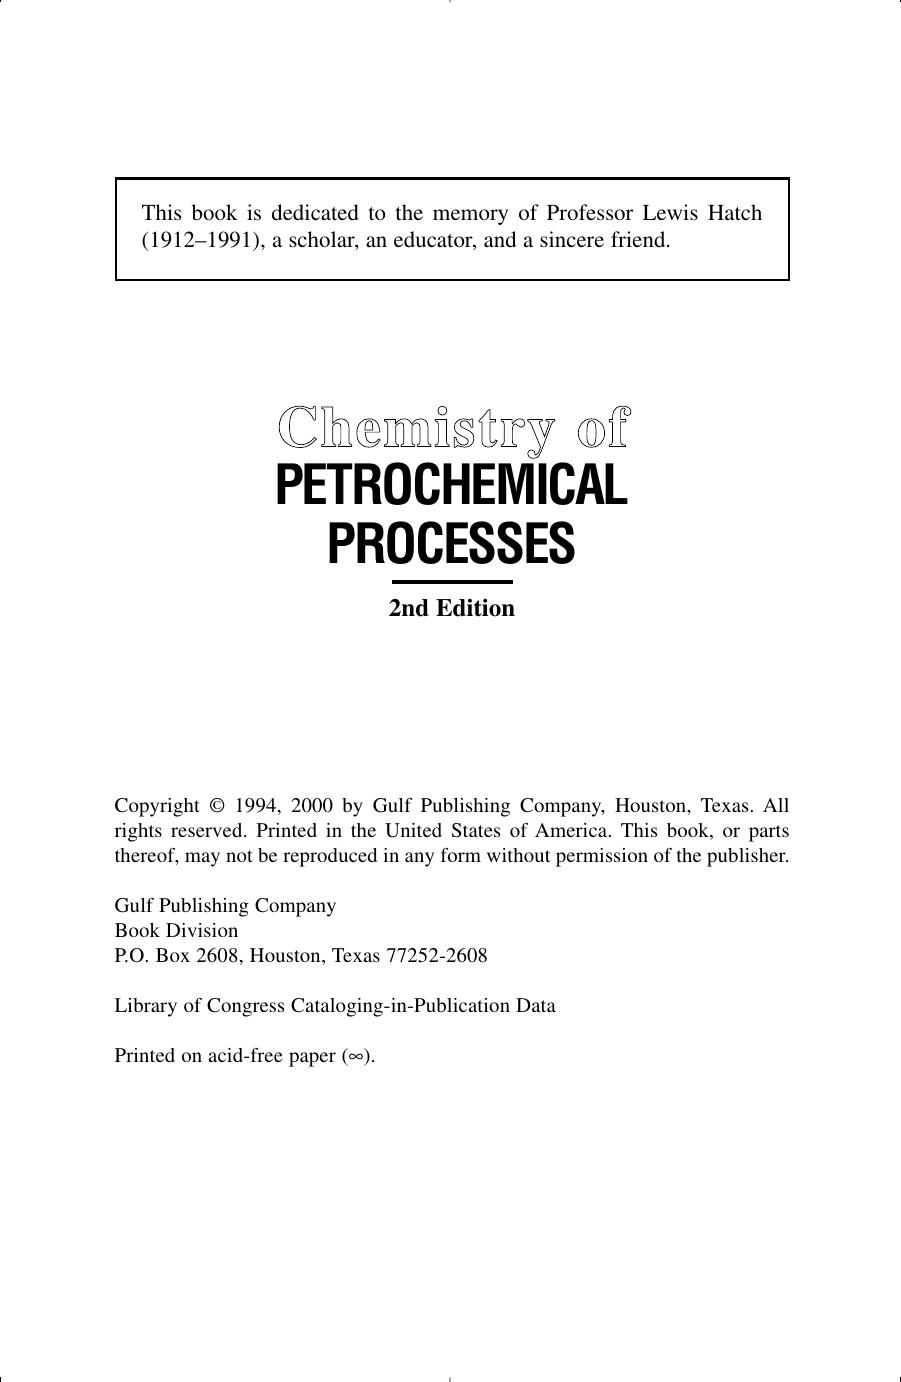 Chemistry of Petrochemical Processes 2E                                                                               1994